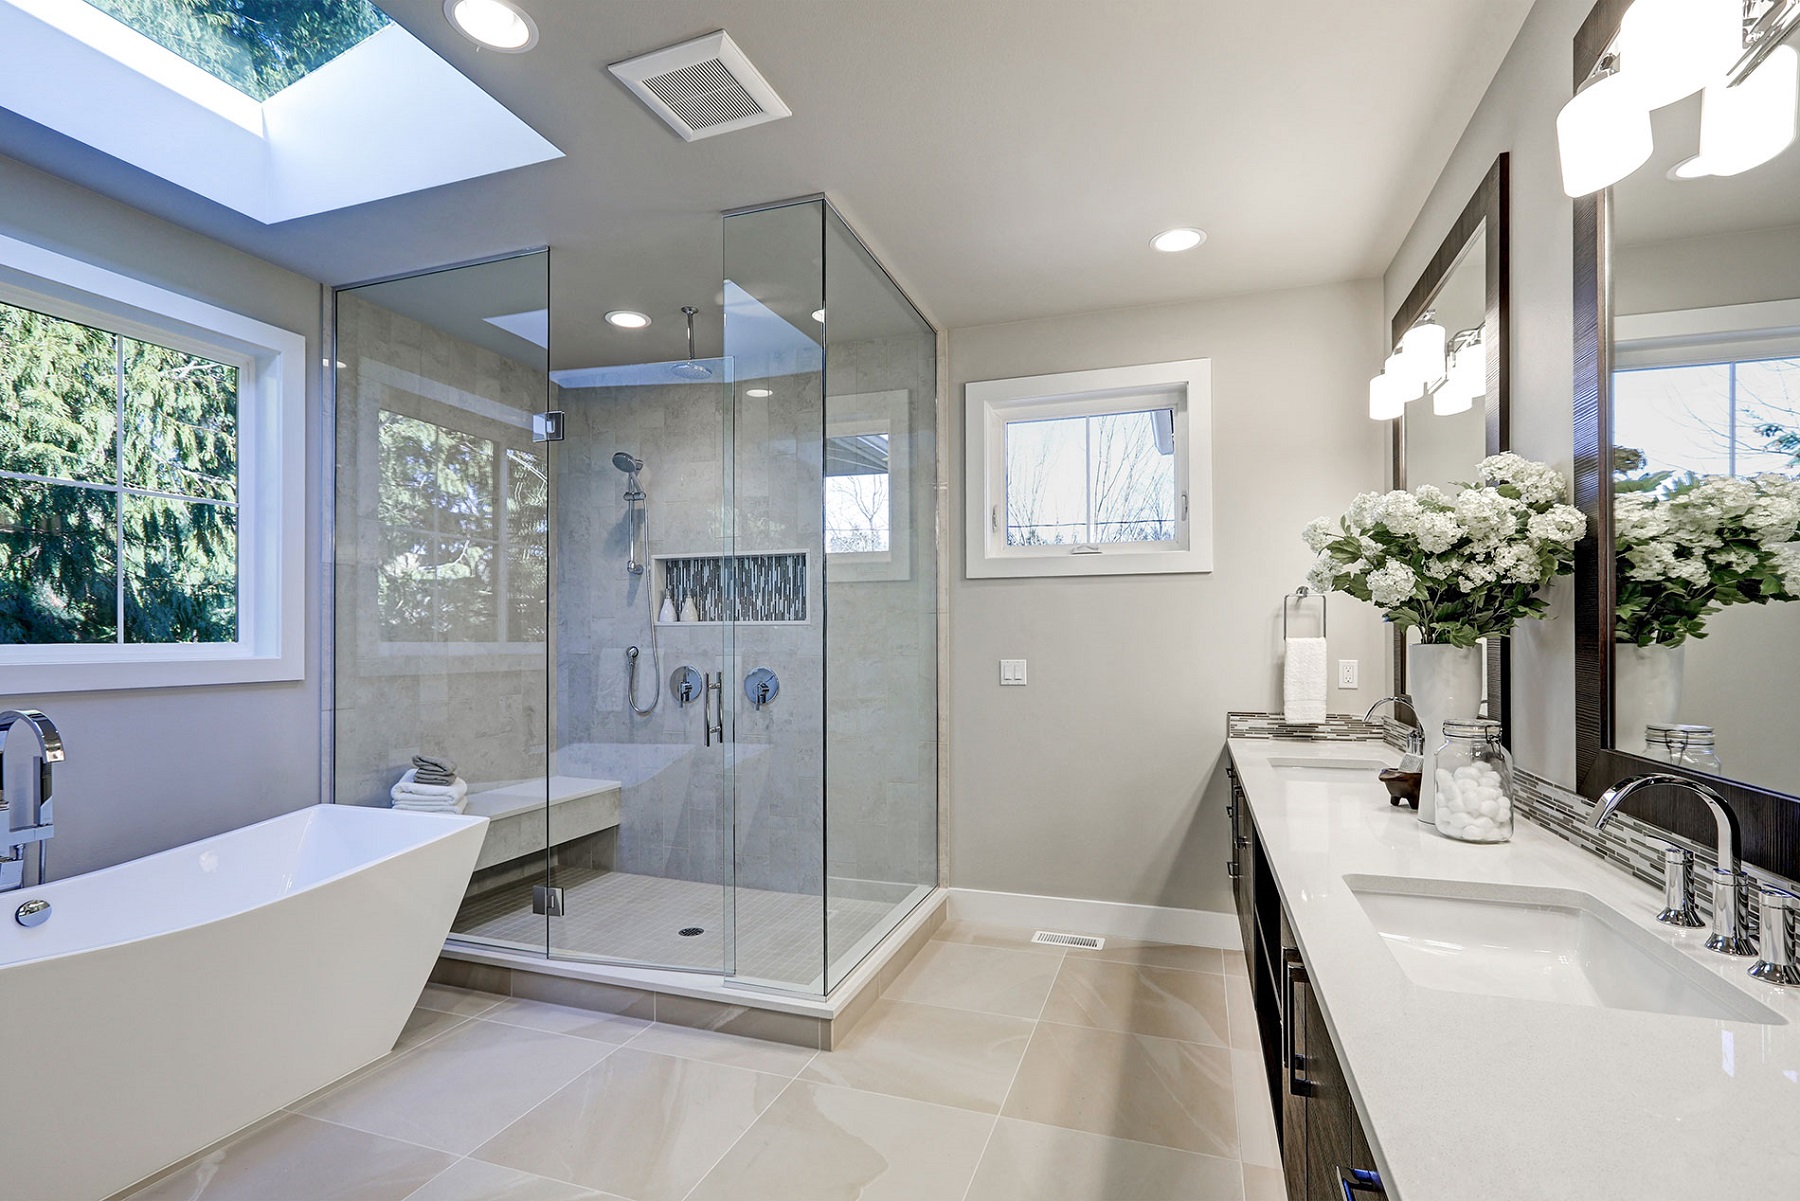 How Much Does A Shower Remodel Cost, Average Bathroom Renovation Cost